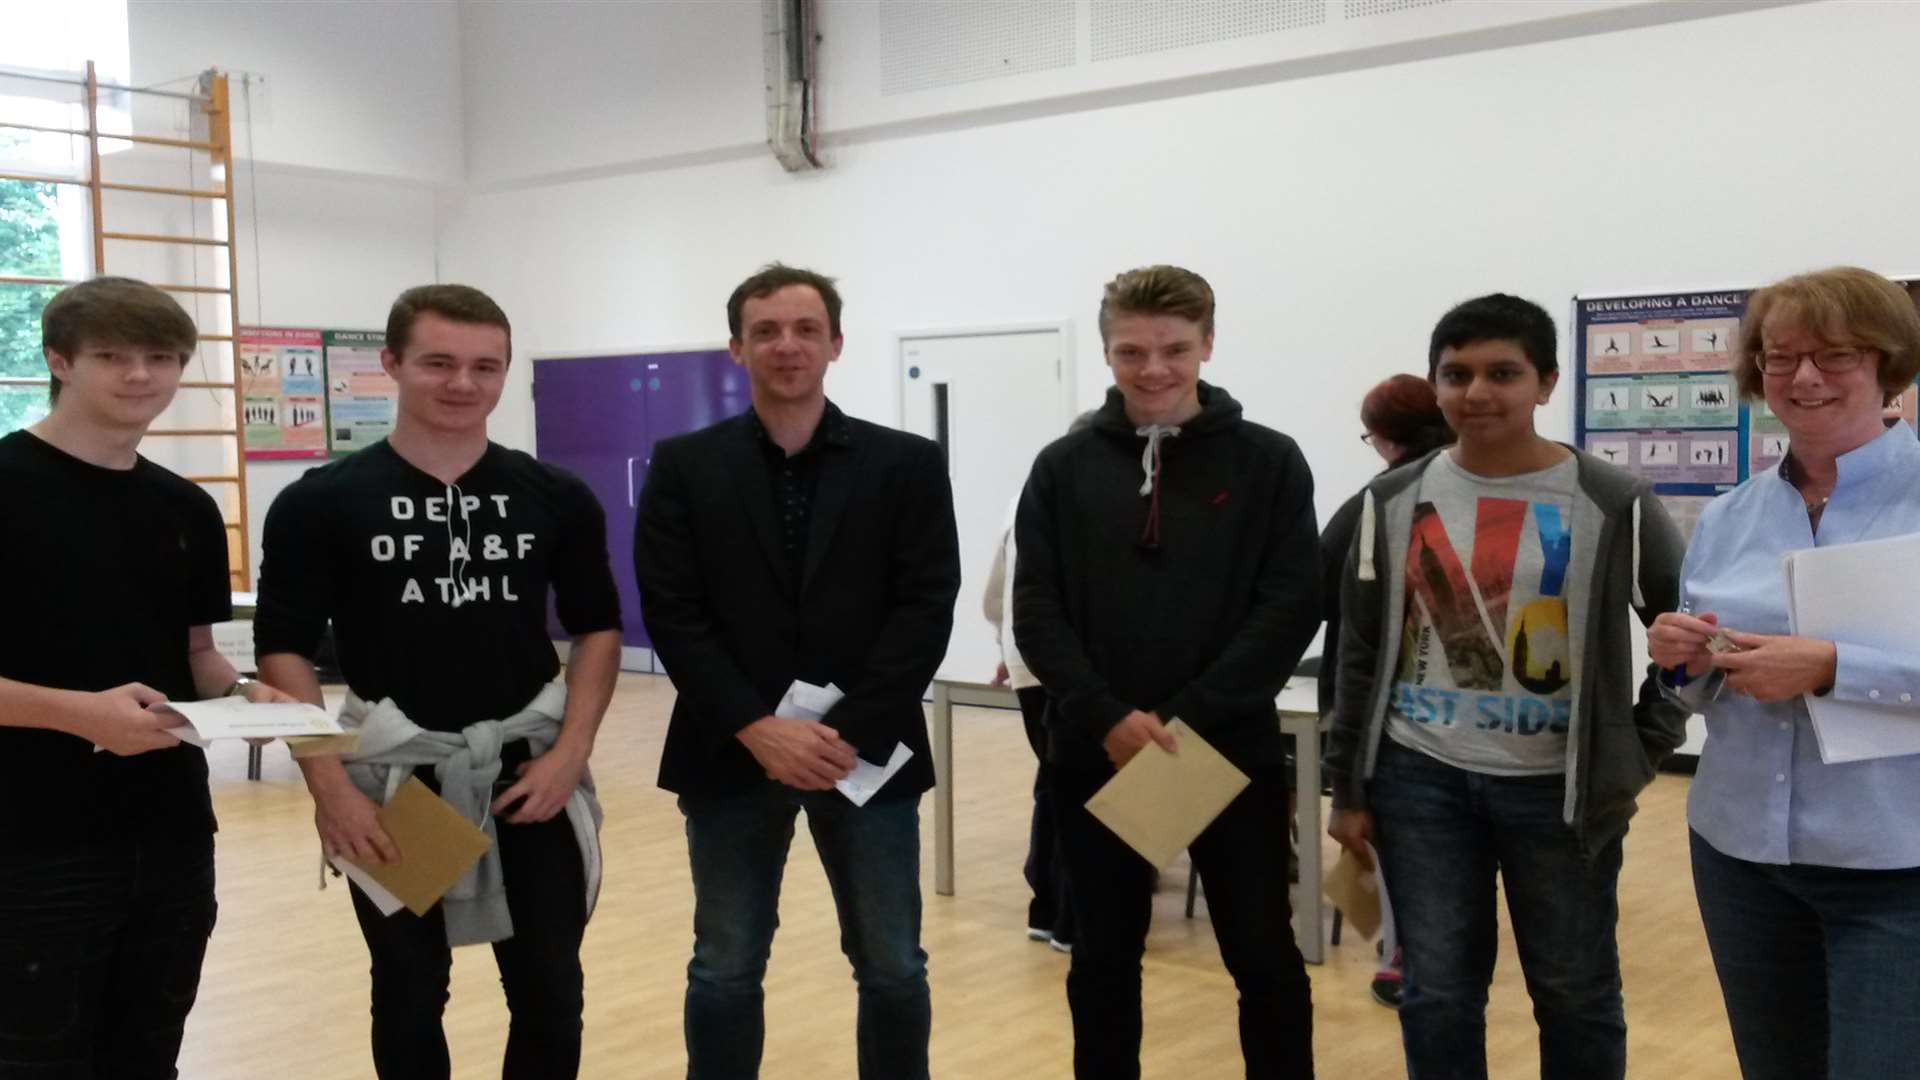 Pupils with results at The Ellington and Hereson School